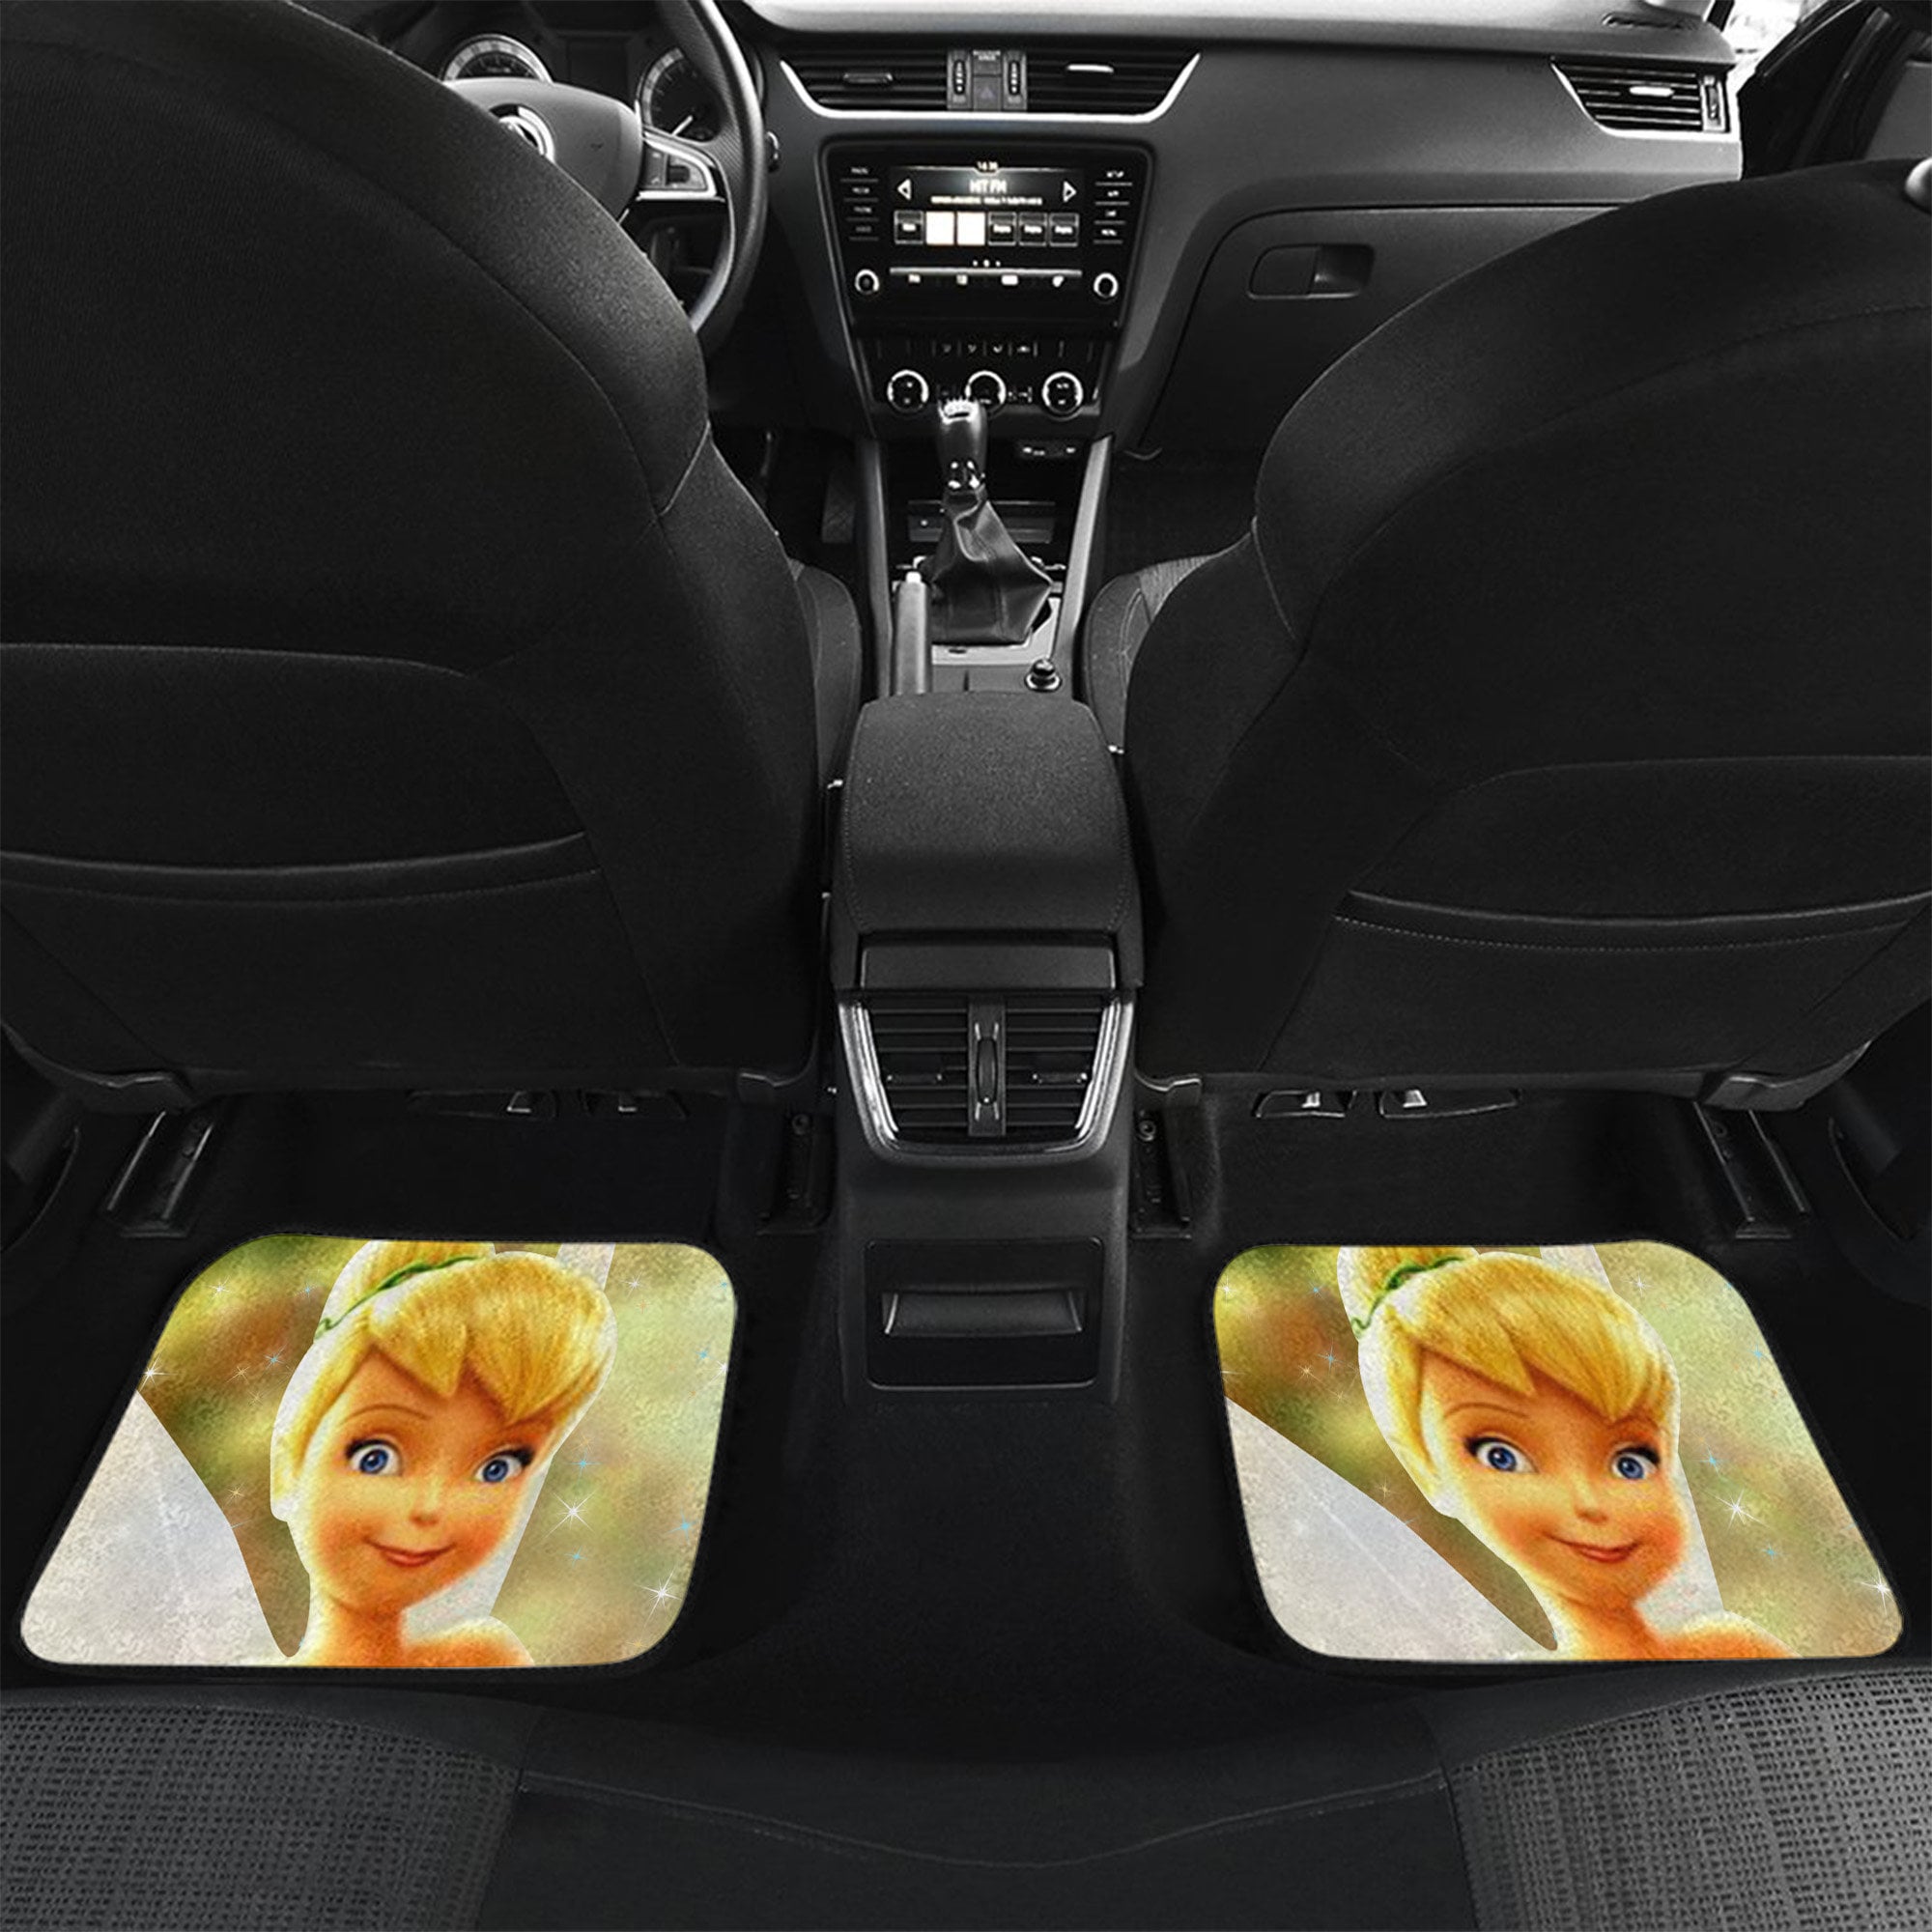 Tinkerbell Patterns Green Yellow White Disney Graphic Cartoon Custom Personalized Car Floor Mat Set Accessories Decorations